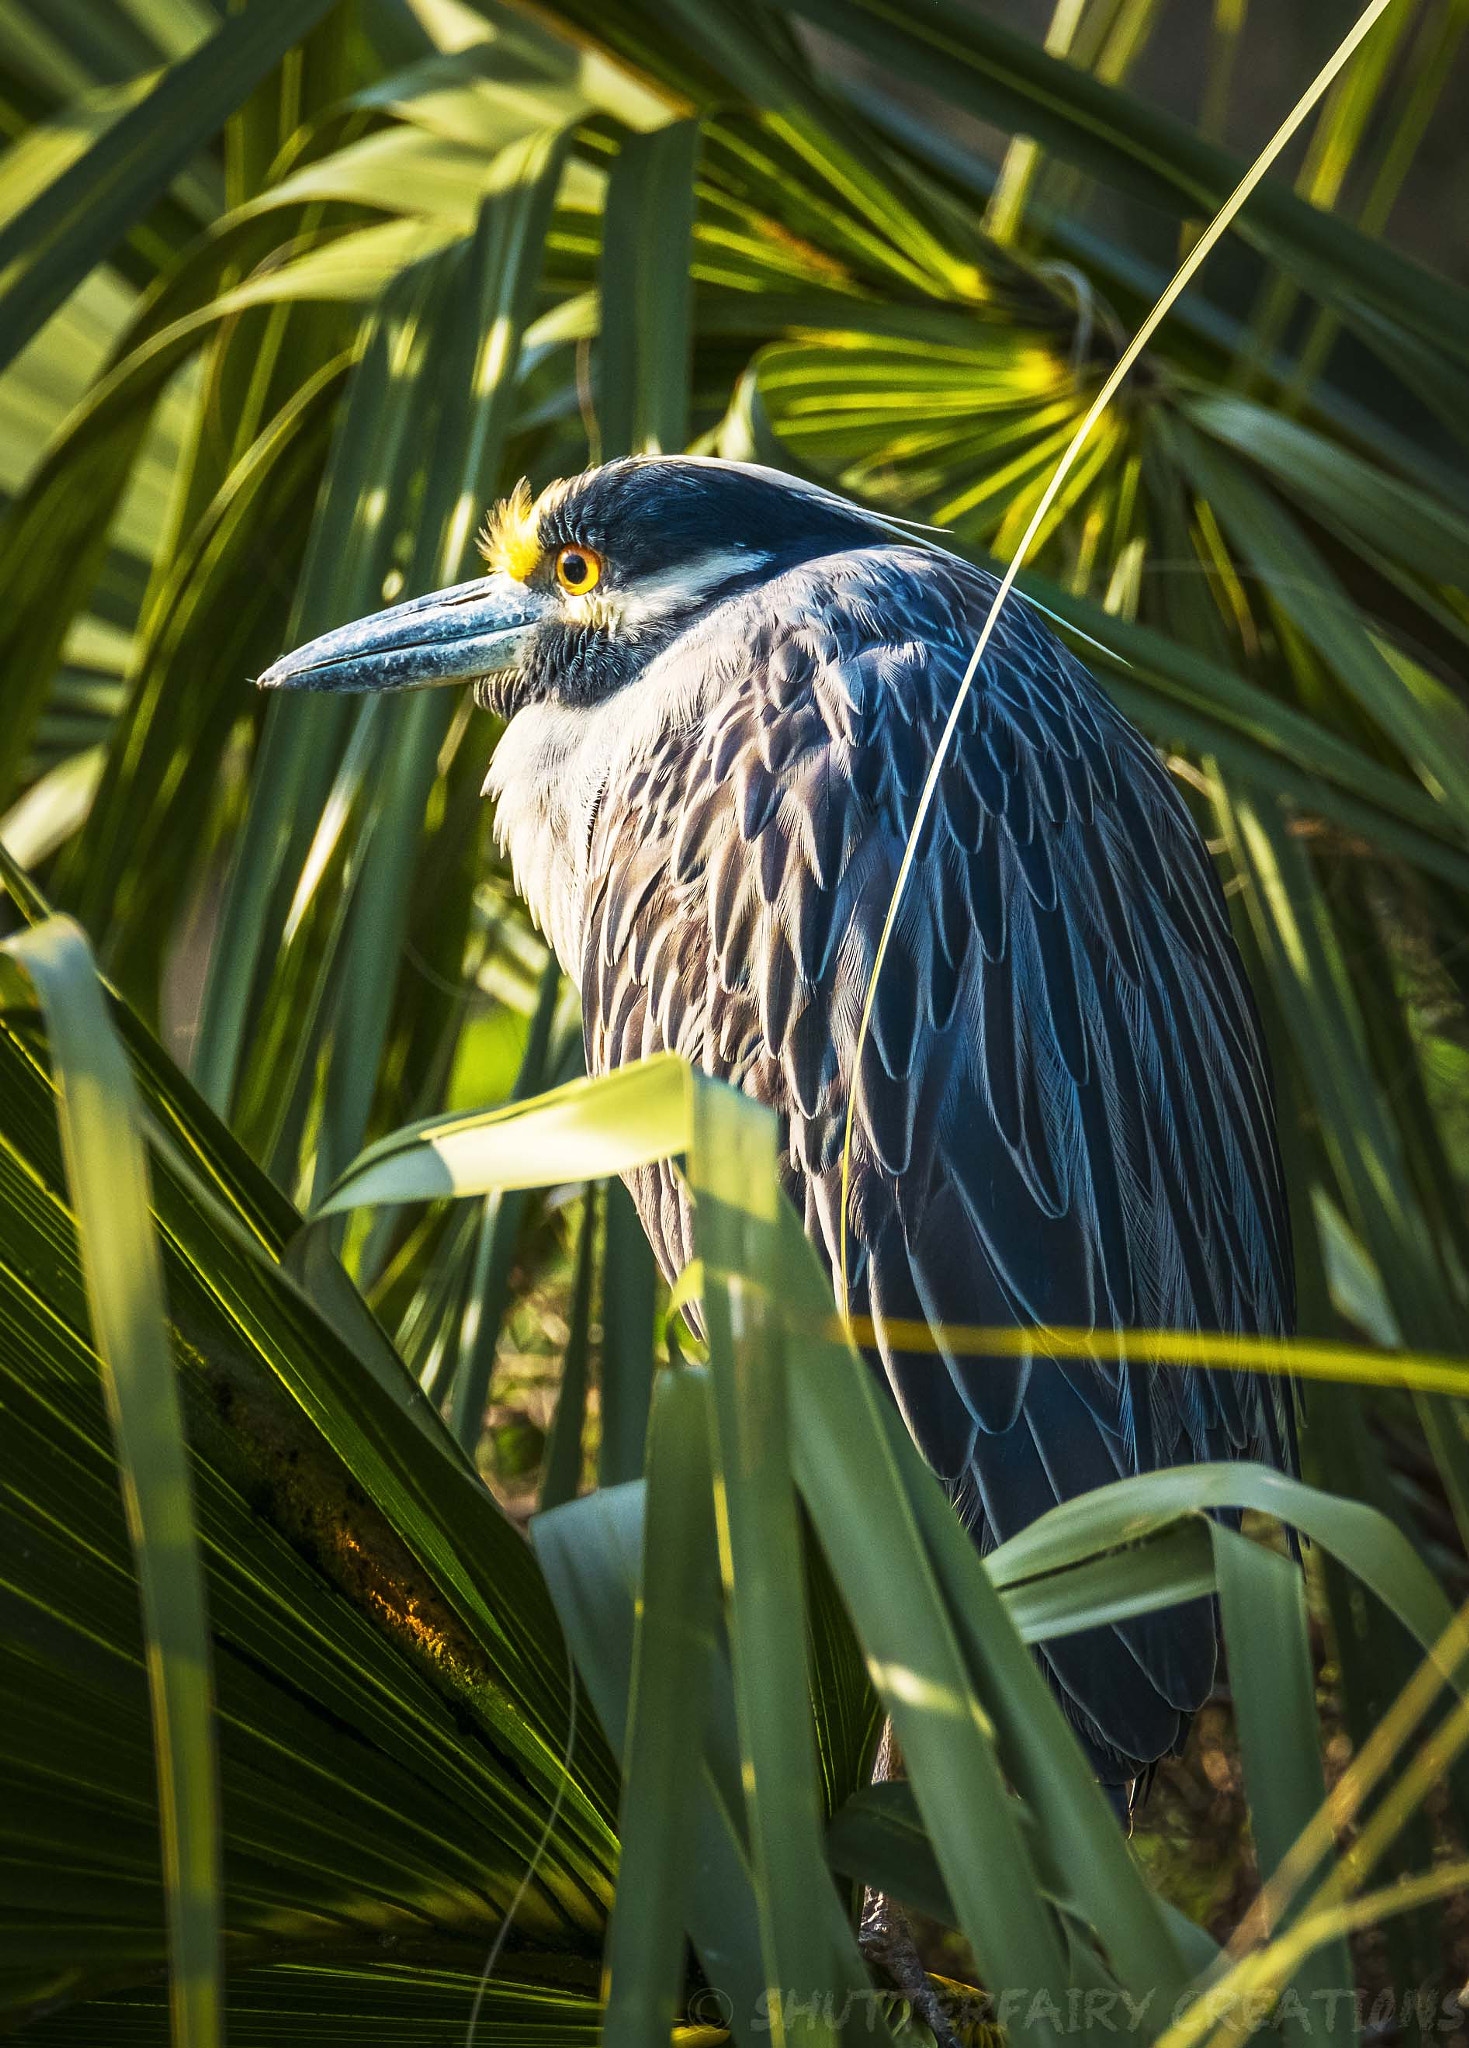 Fujifilm X-T2 + XF100-400mmF4.5-5.6 R LM OIS WR + 1.4x sample photo. Yellow capped night heron in st. augustine photography